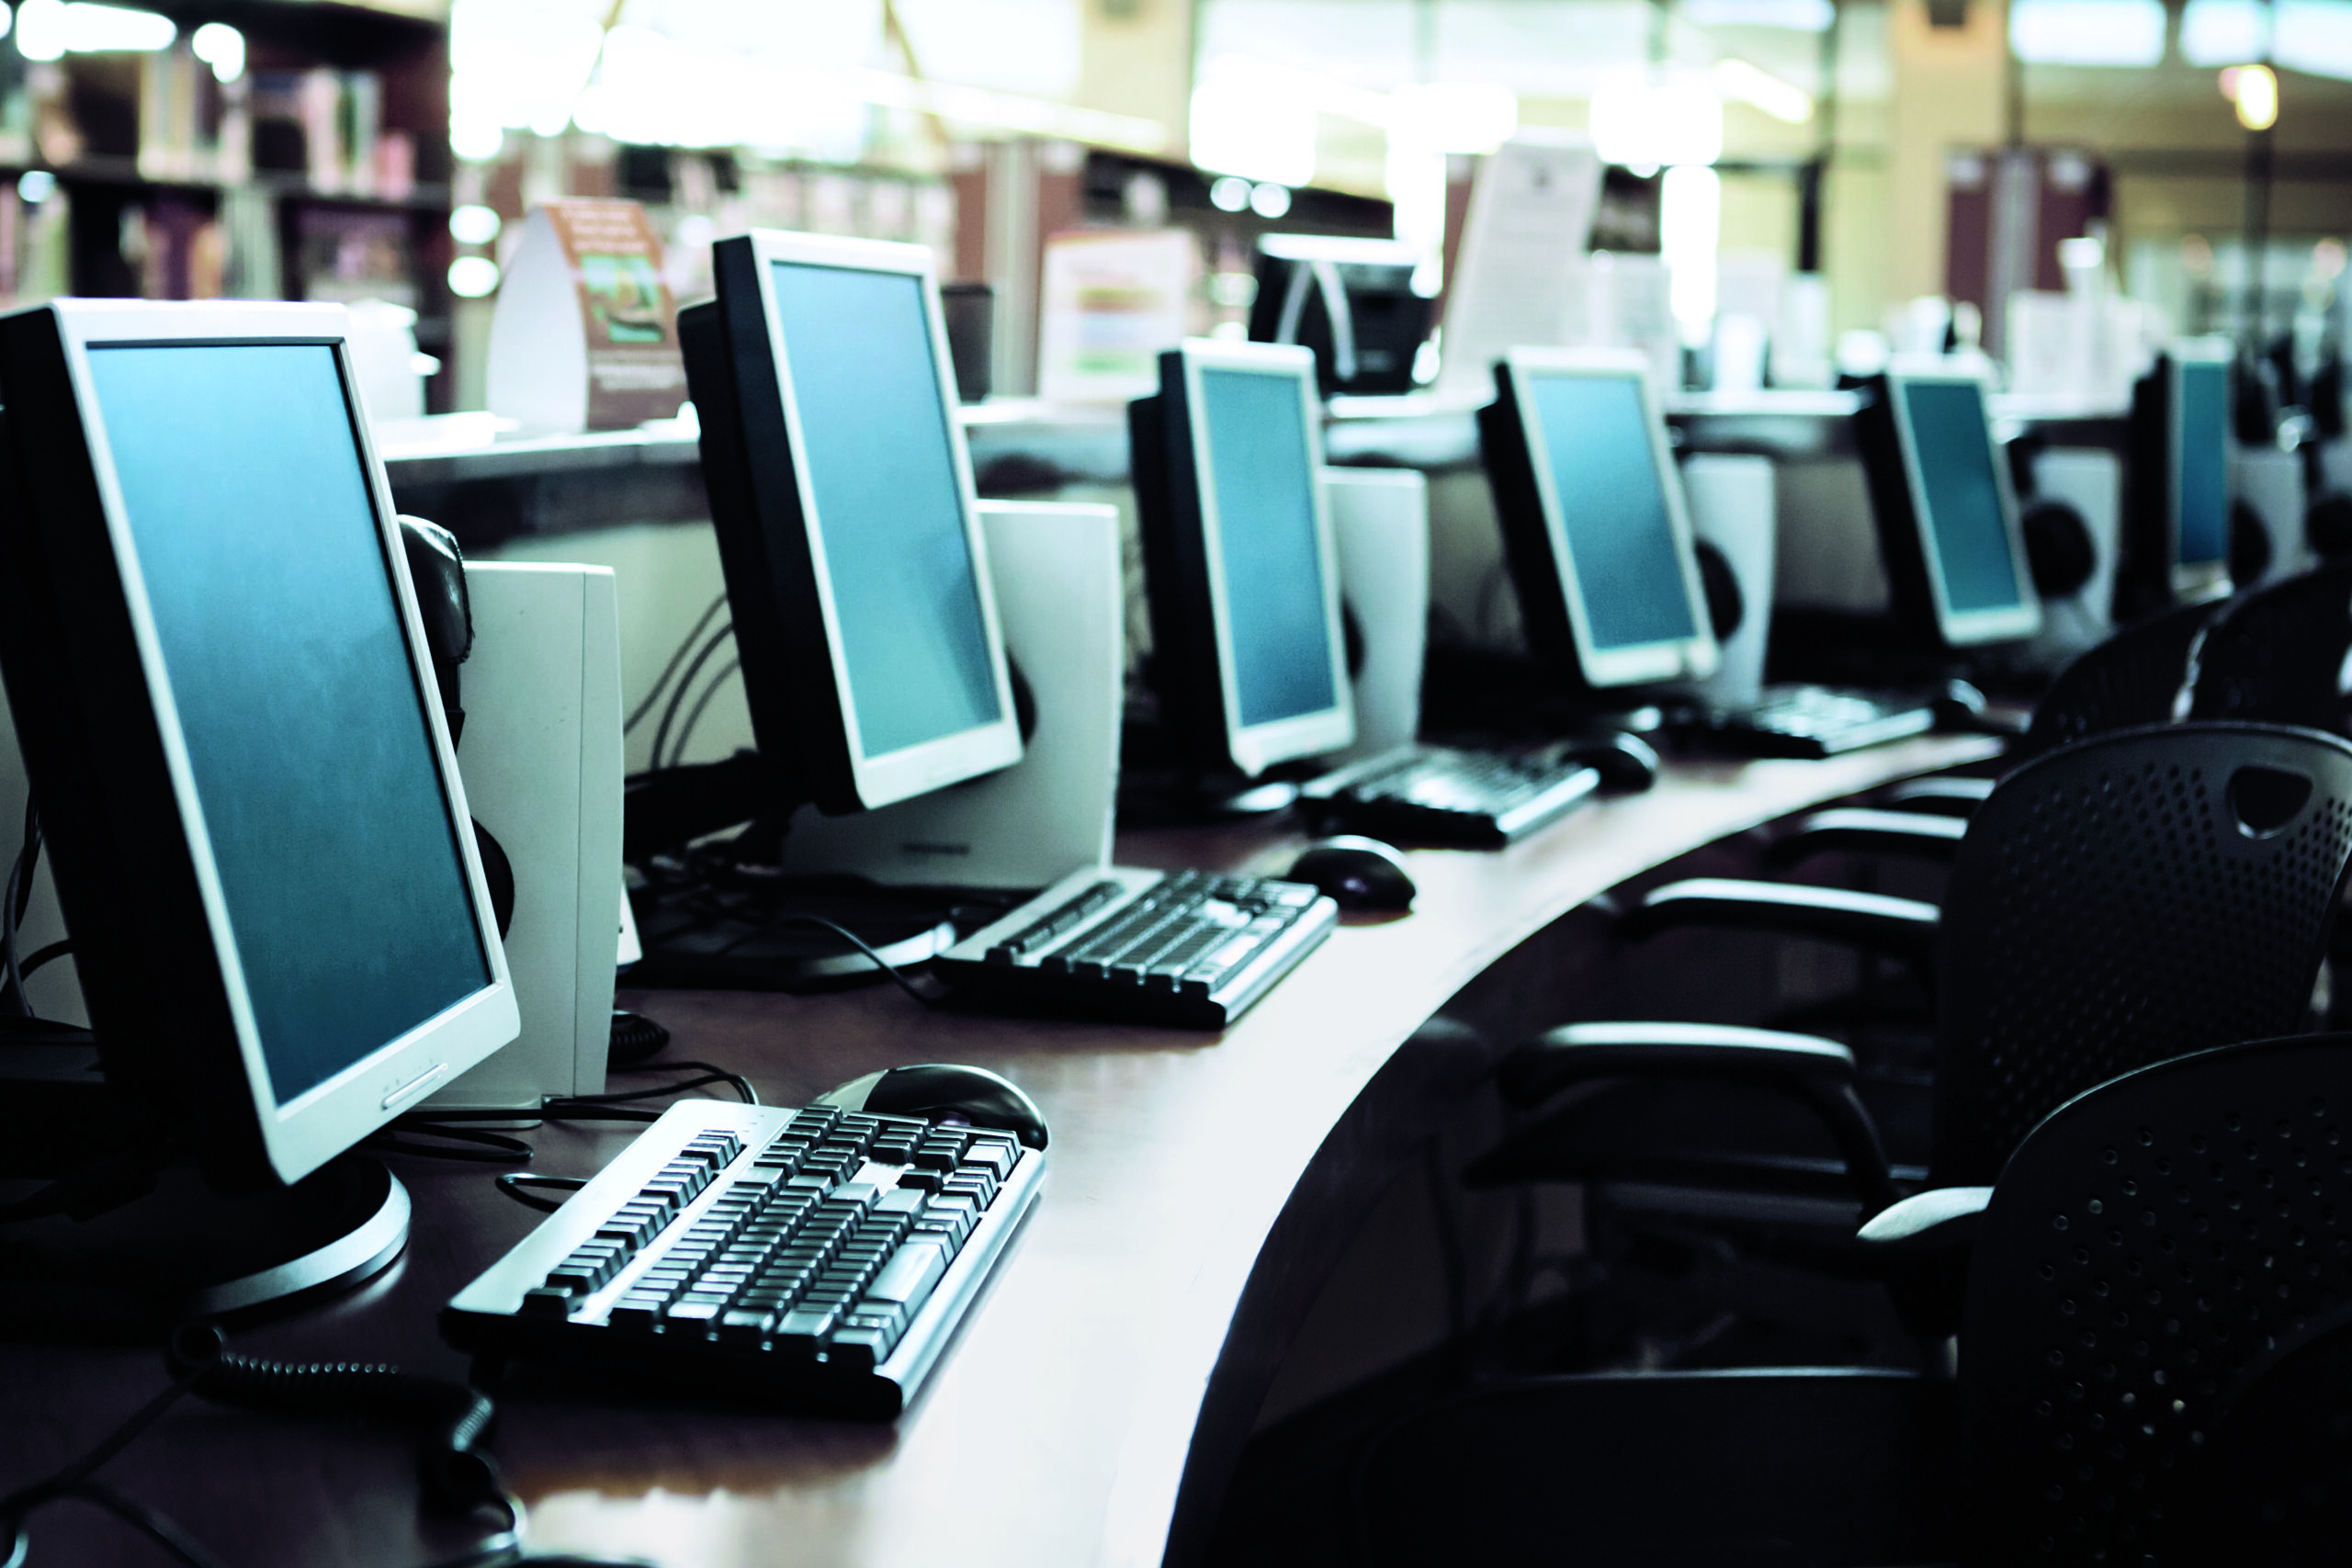 Closeup of a row of desktop computers with keyboards along a continuous desk in a library.